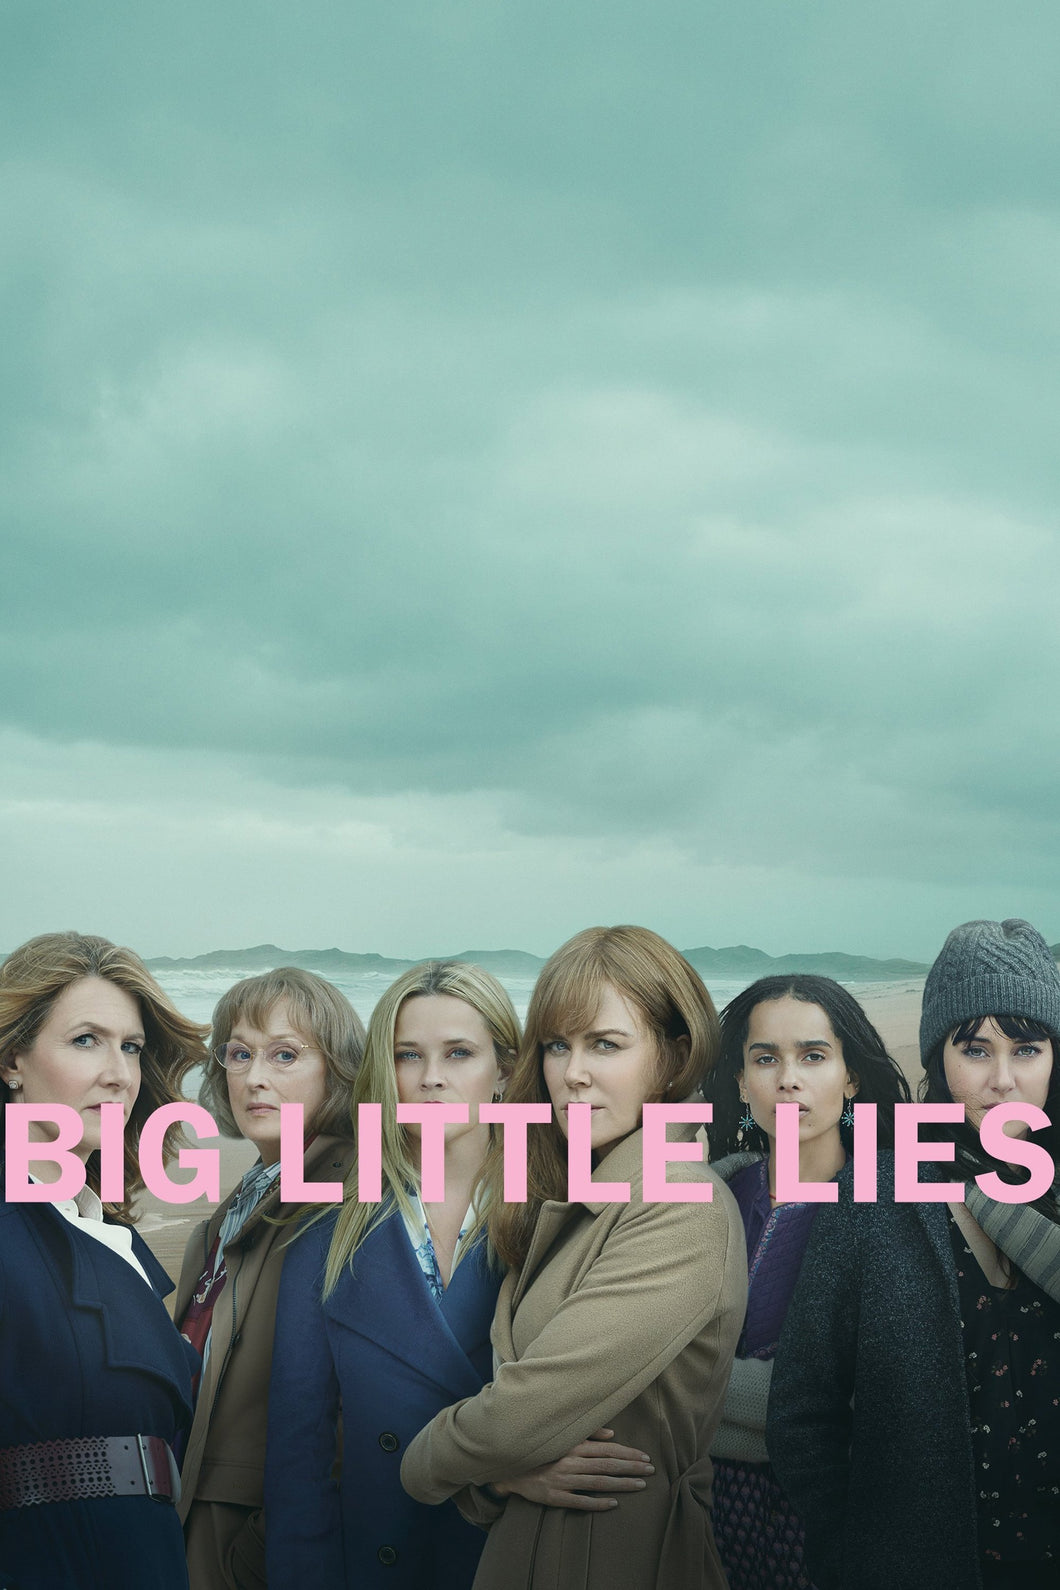 Big Little Lies TV Show Poster Framed or Unframed Glossy Poster Free UK Shipping!!!